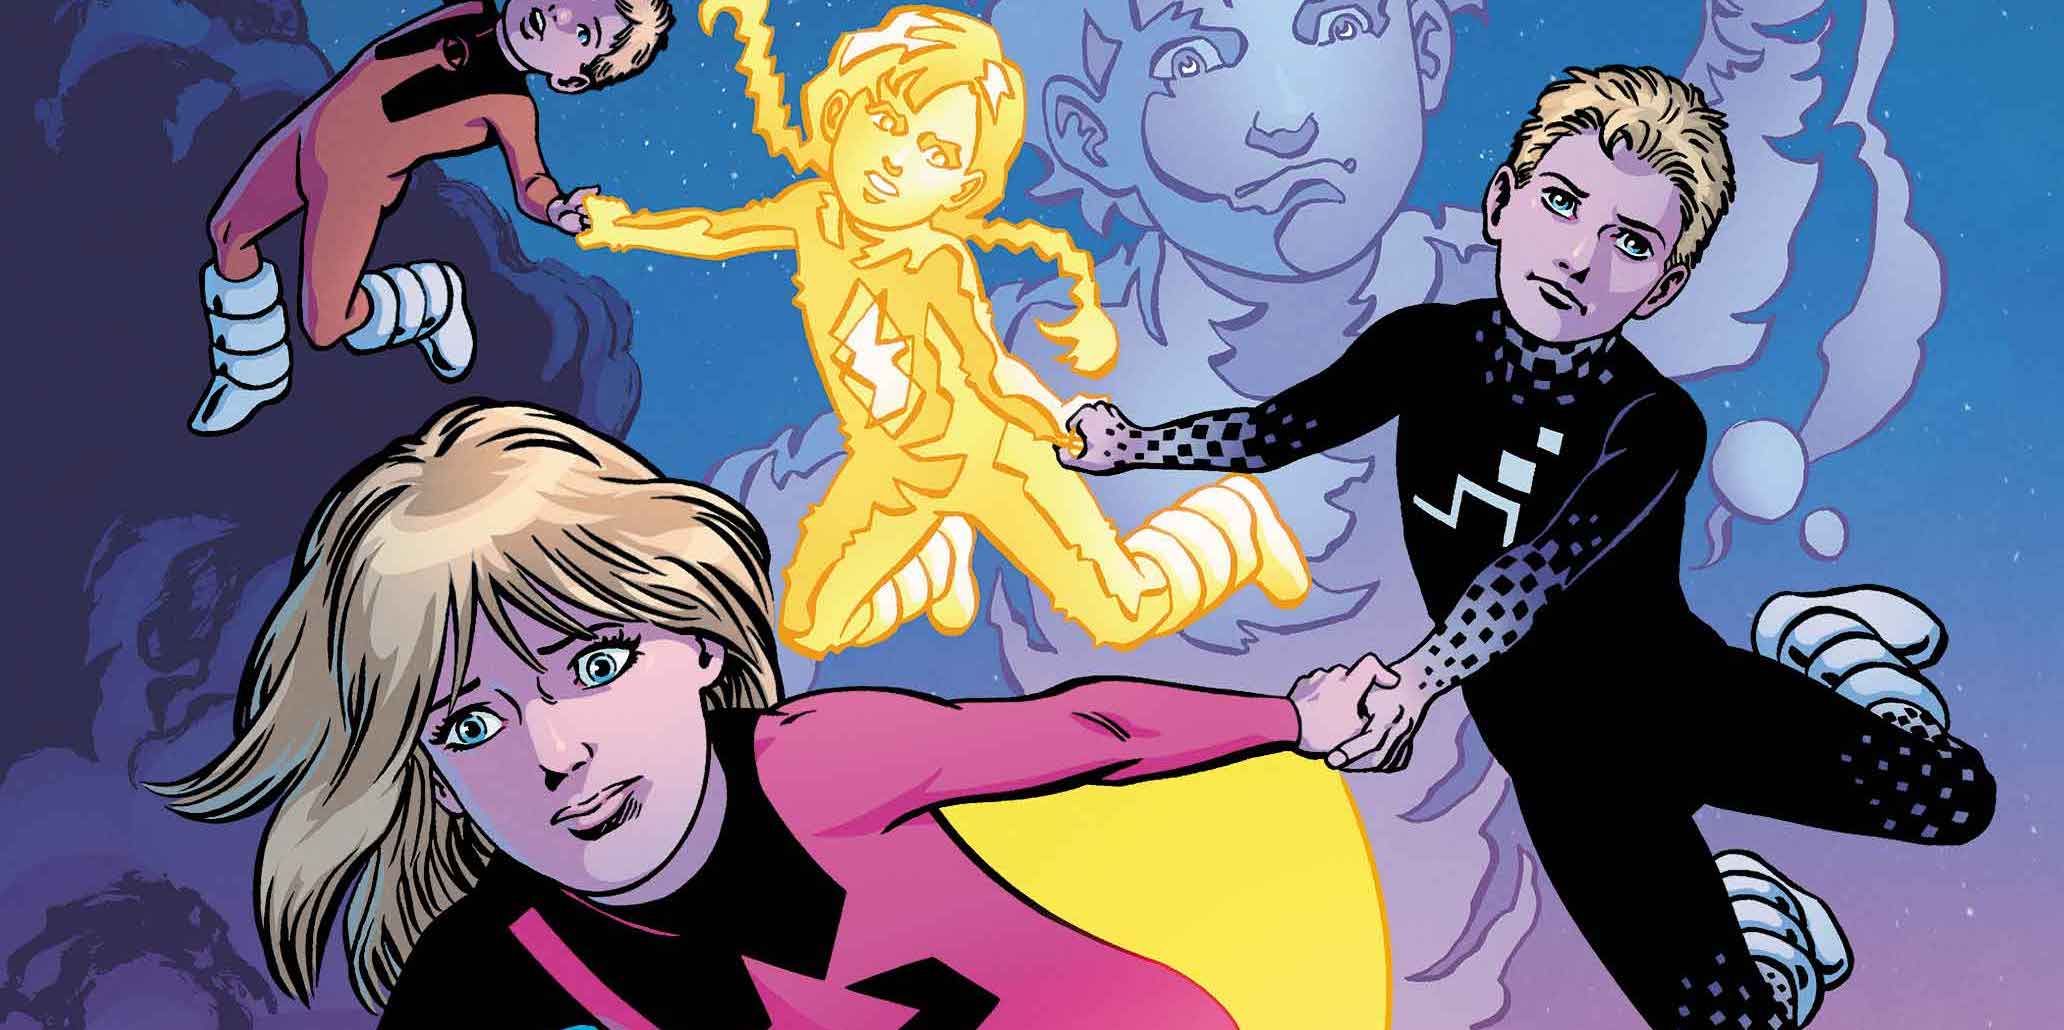 EXCLUSIVE Marvel Preview: Power Pack: Into the Storm #1